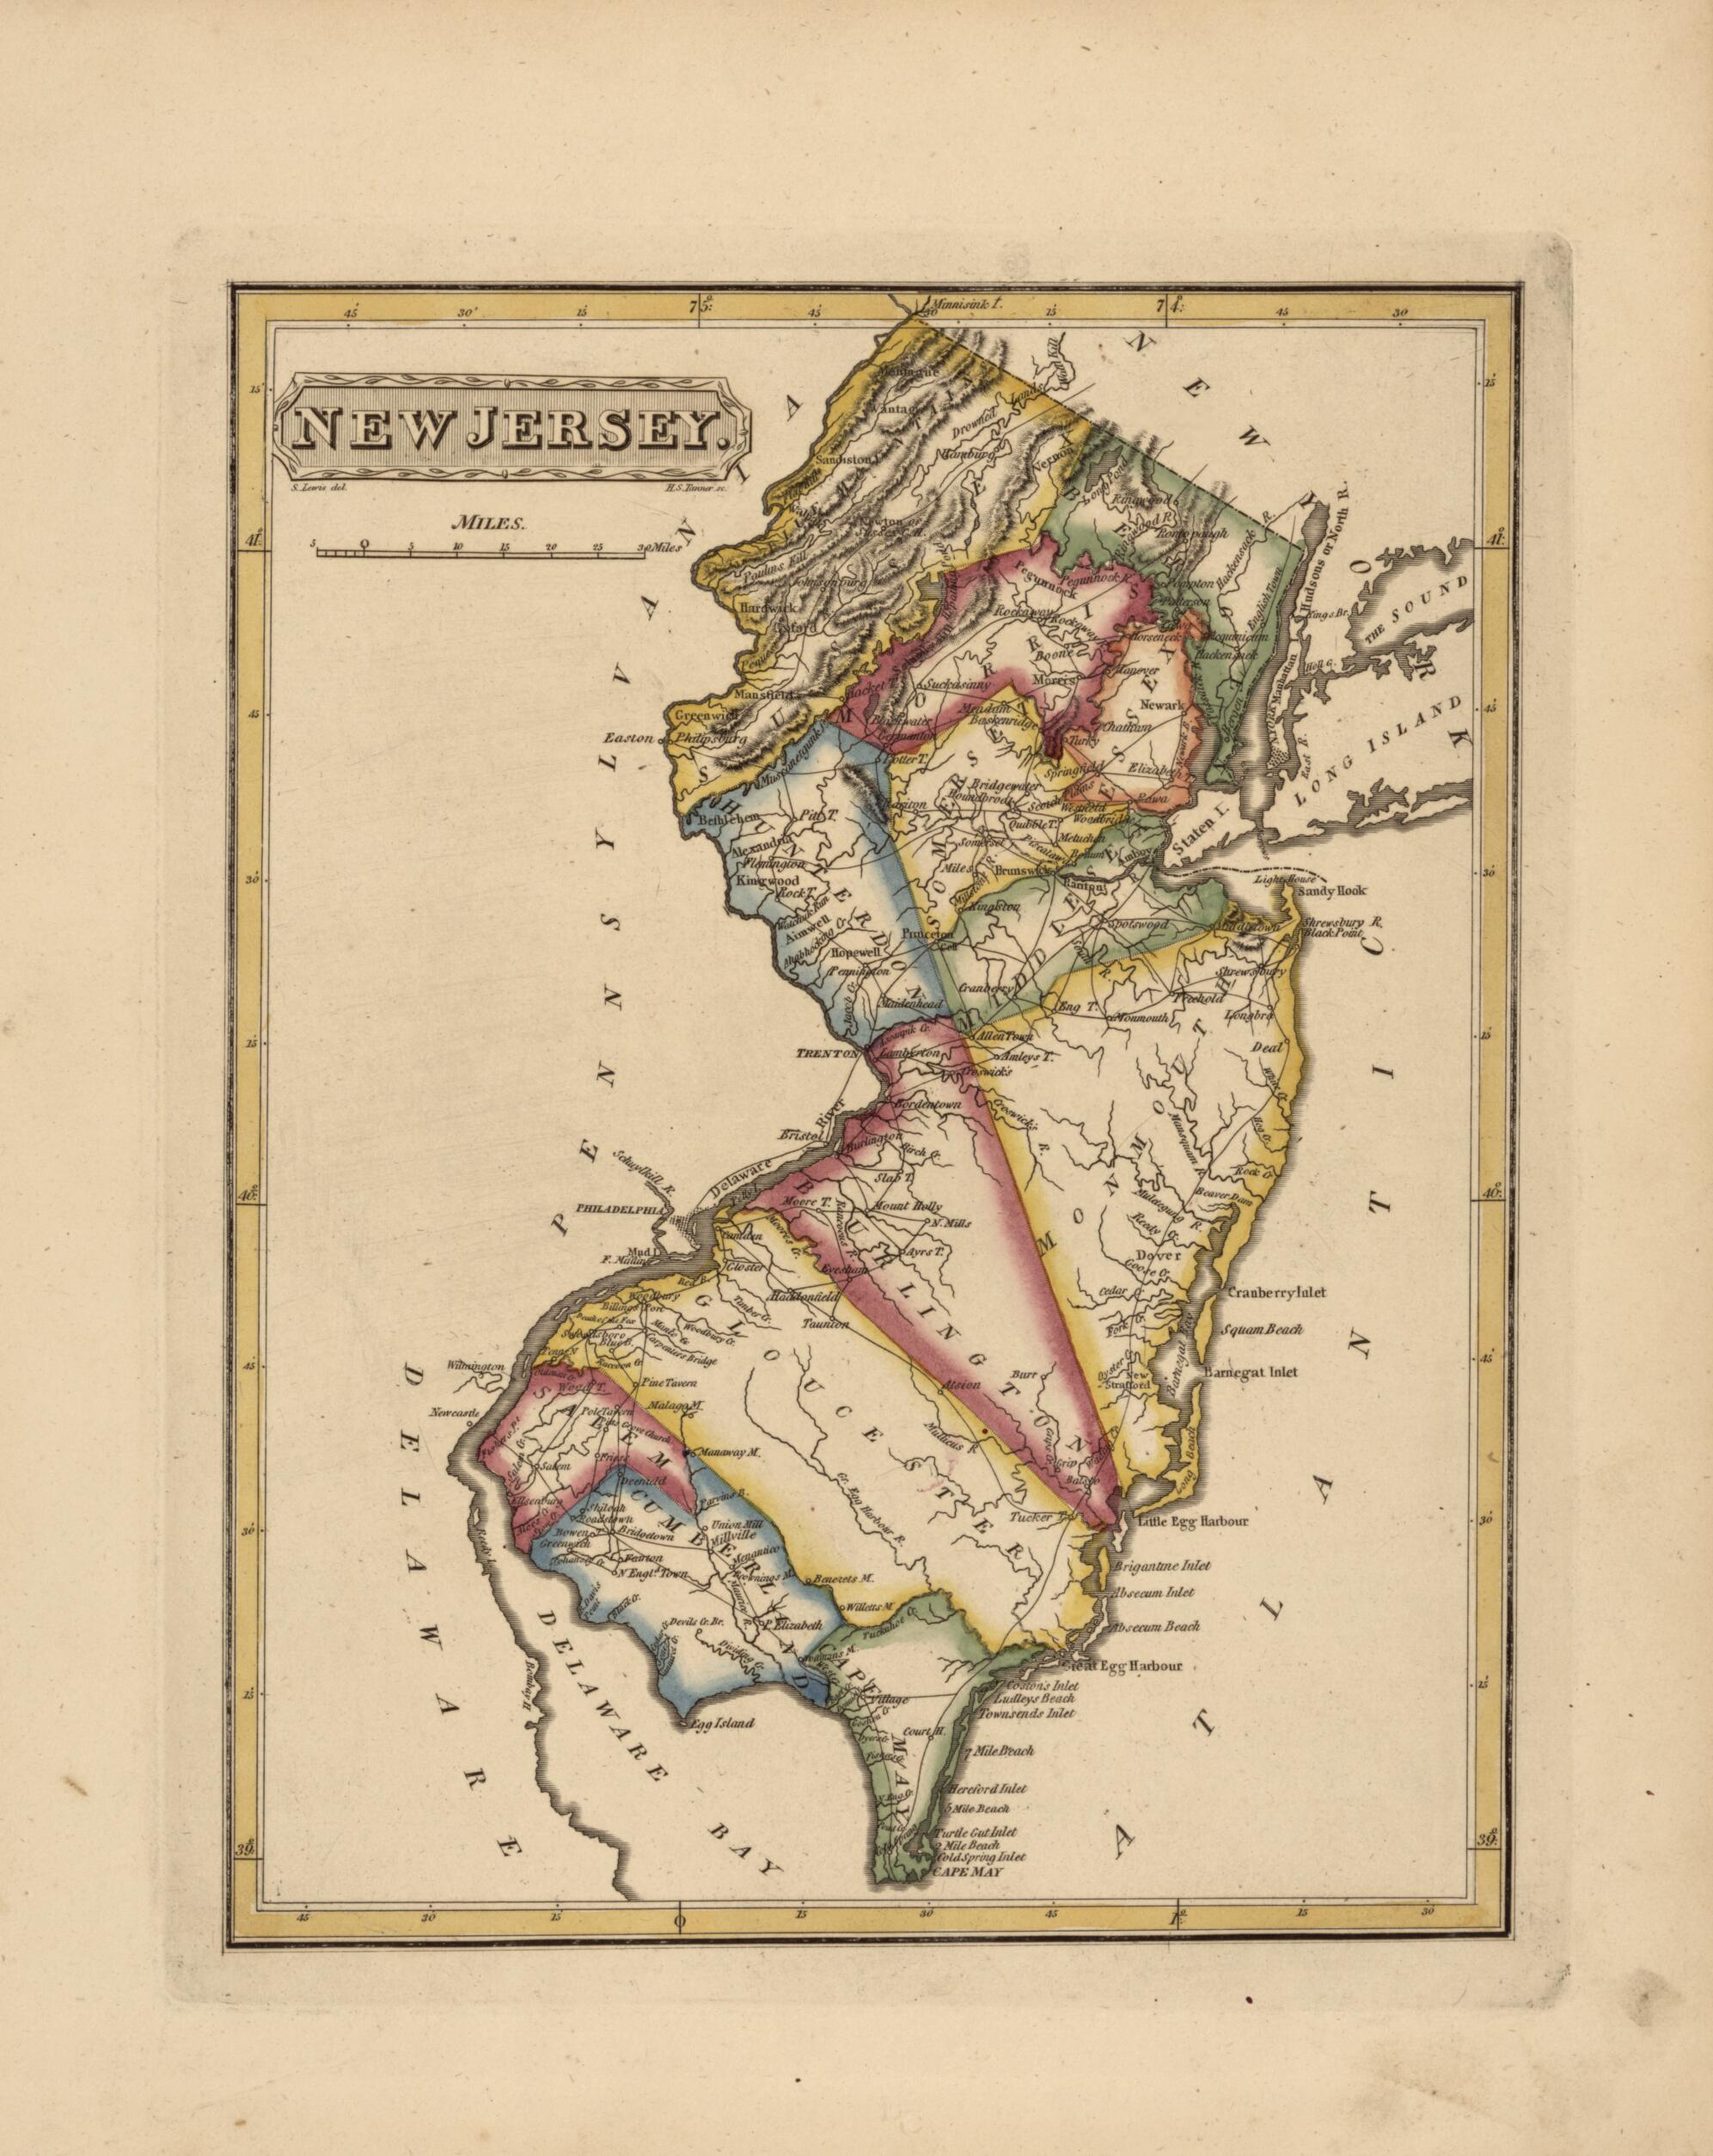 This old map of New Jersey from a New and Elegant General Atlas, Containing Maps of Each of the United States. from 1817 was created by Henry Schenck Tanner in 1817